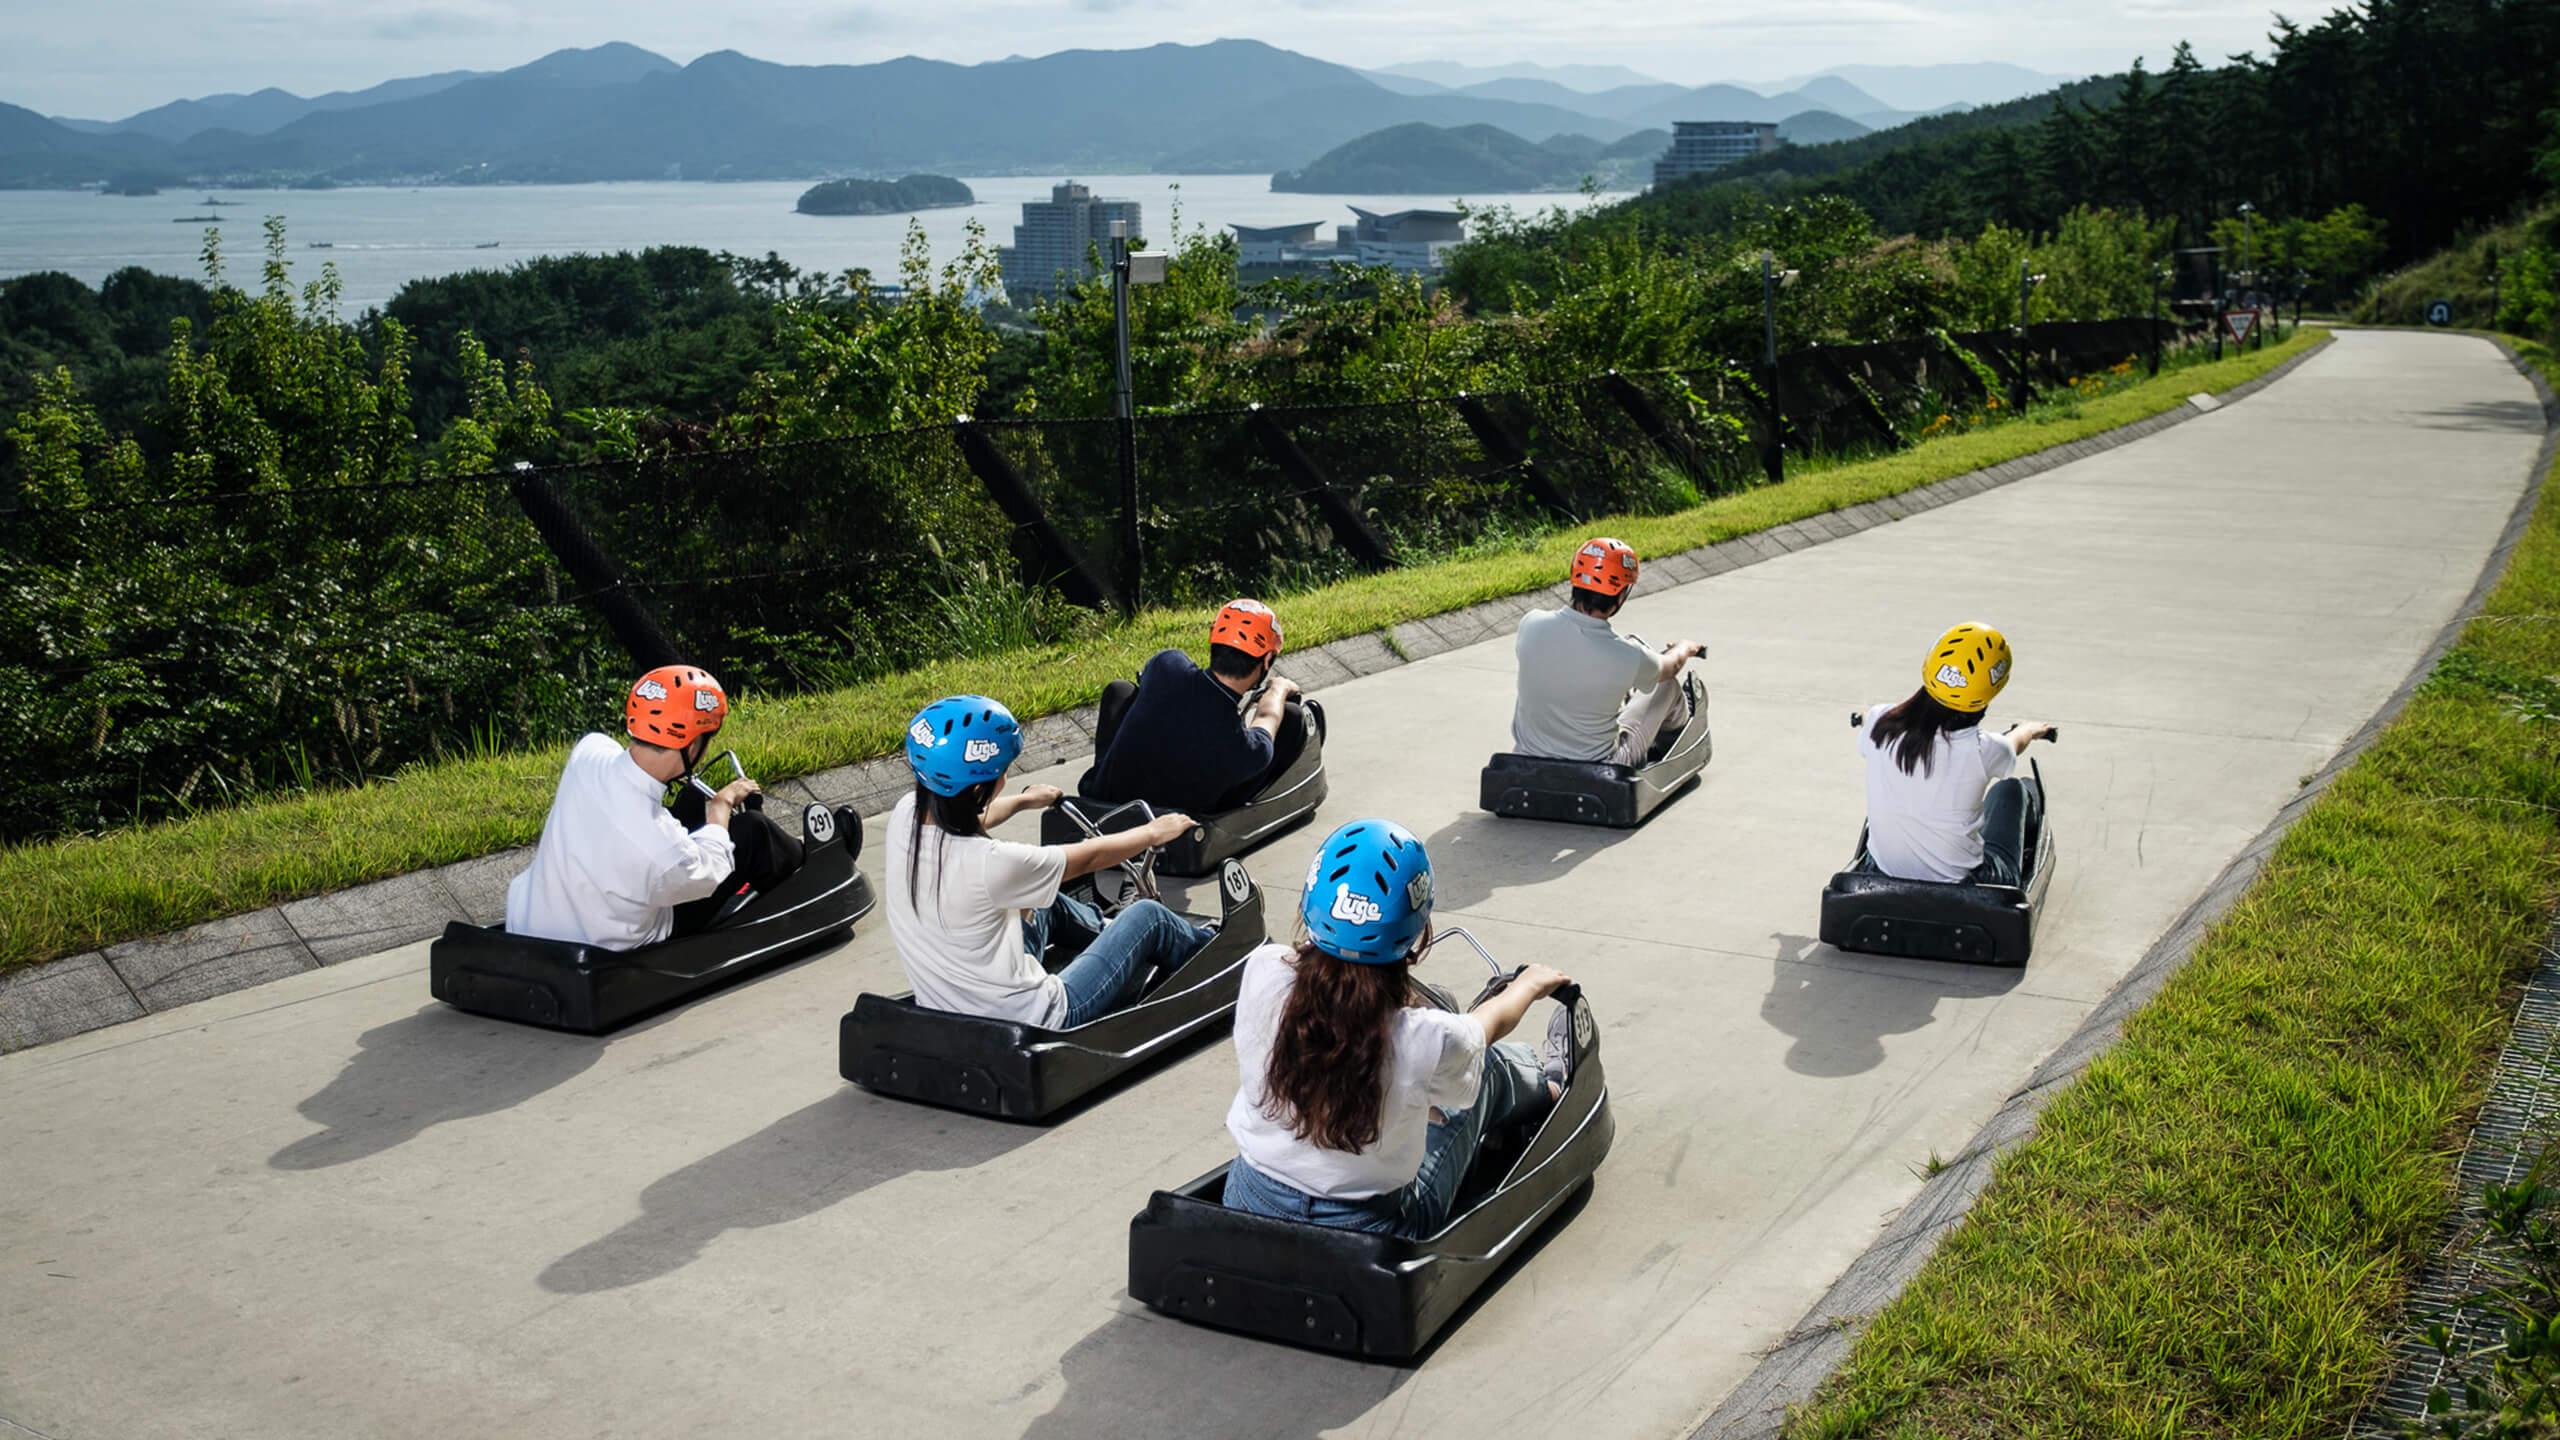 A group of people head down the Luge tracks together with views of Tongyeong city and the ocean behind them.